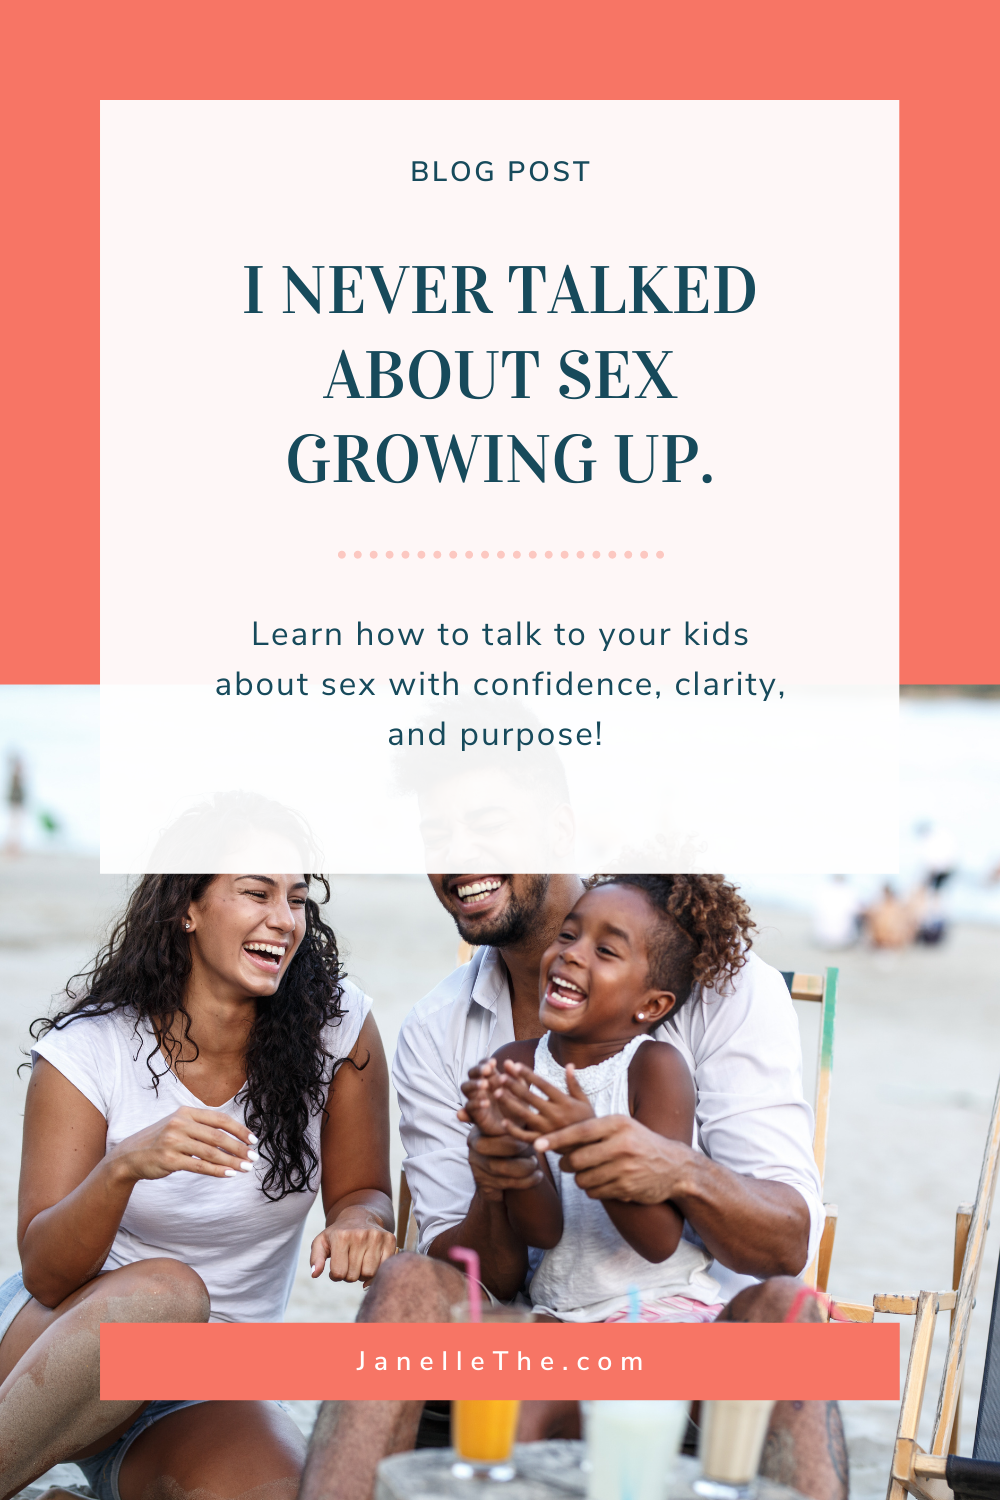 Sex ed for parents! Learn how to talk to your kids about sex and give the talk with confidence, clarity, and purpose. Janelle The is a sexual health educator reimagining the talk! 